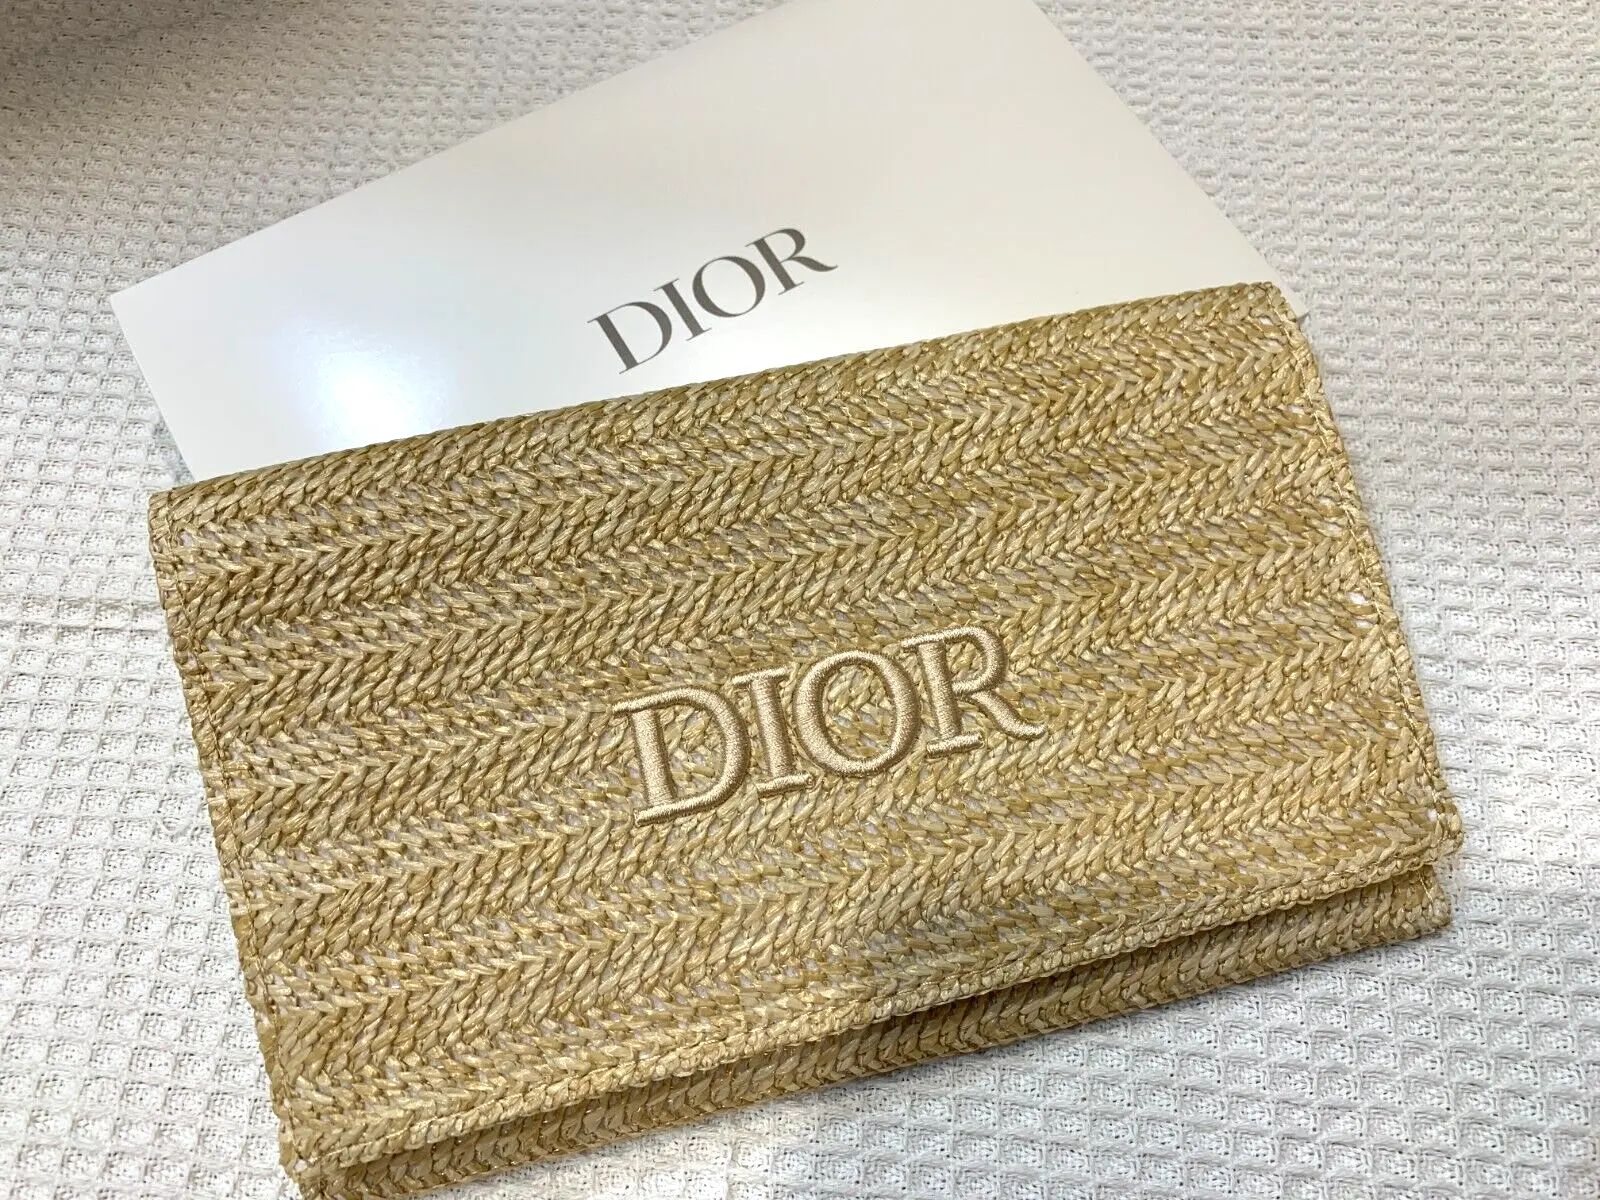 Dior Beauty Bamboo Makeup Pouch Cosmetic Pouch With box  | eBay | eBay US